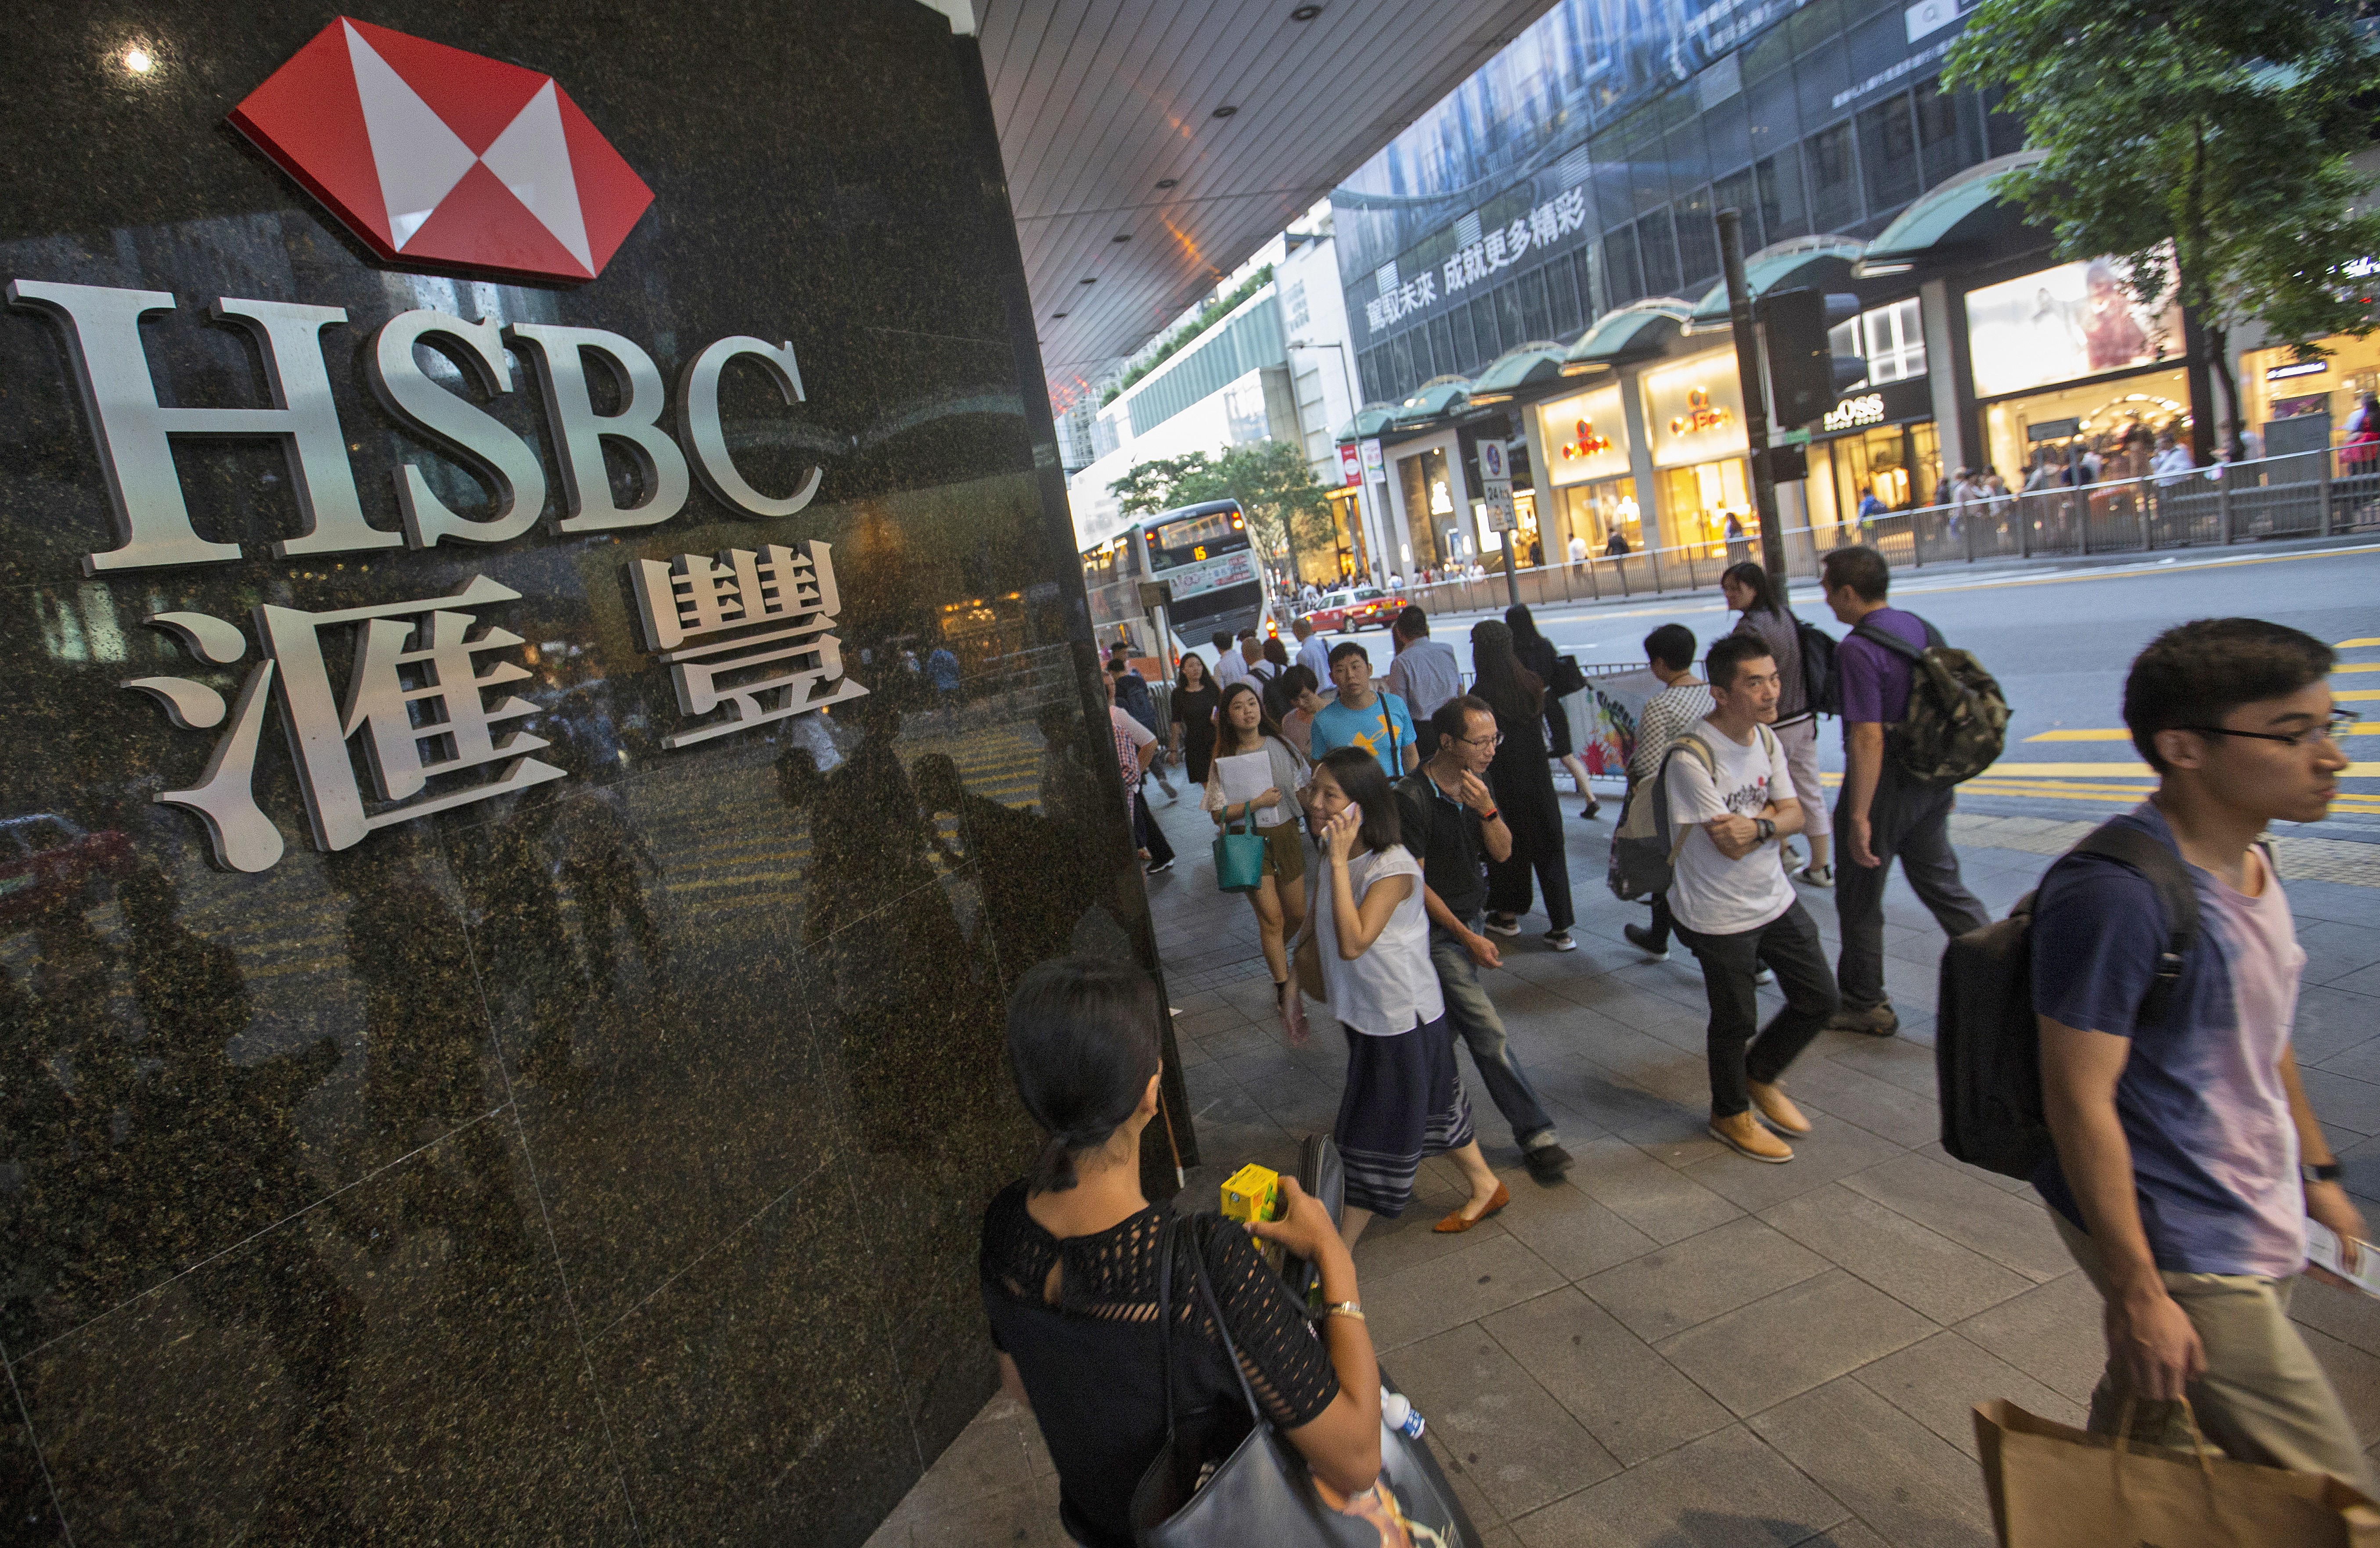 People walk past the HSBC logo in Central District on October 29. HSBC posted strong third-quarter profits, despite a leaked memo, revealed in September, from investment bankers that criticised the company’s “utterly failed” investment banking strategy. Photo: EPA-EFE